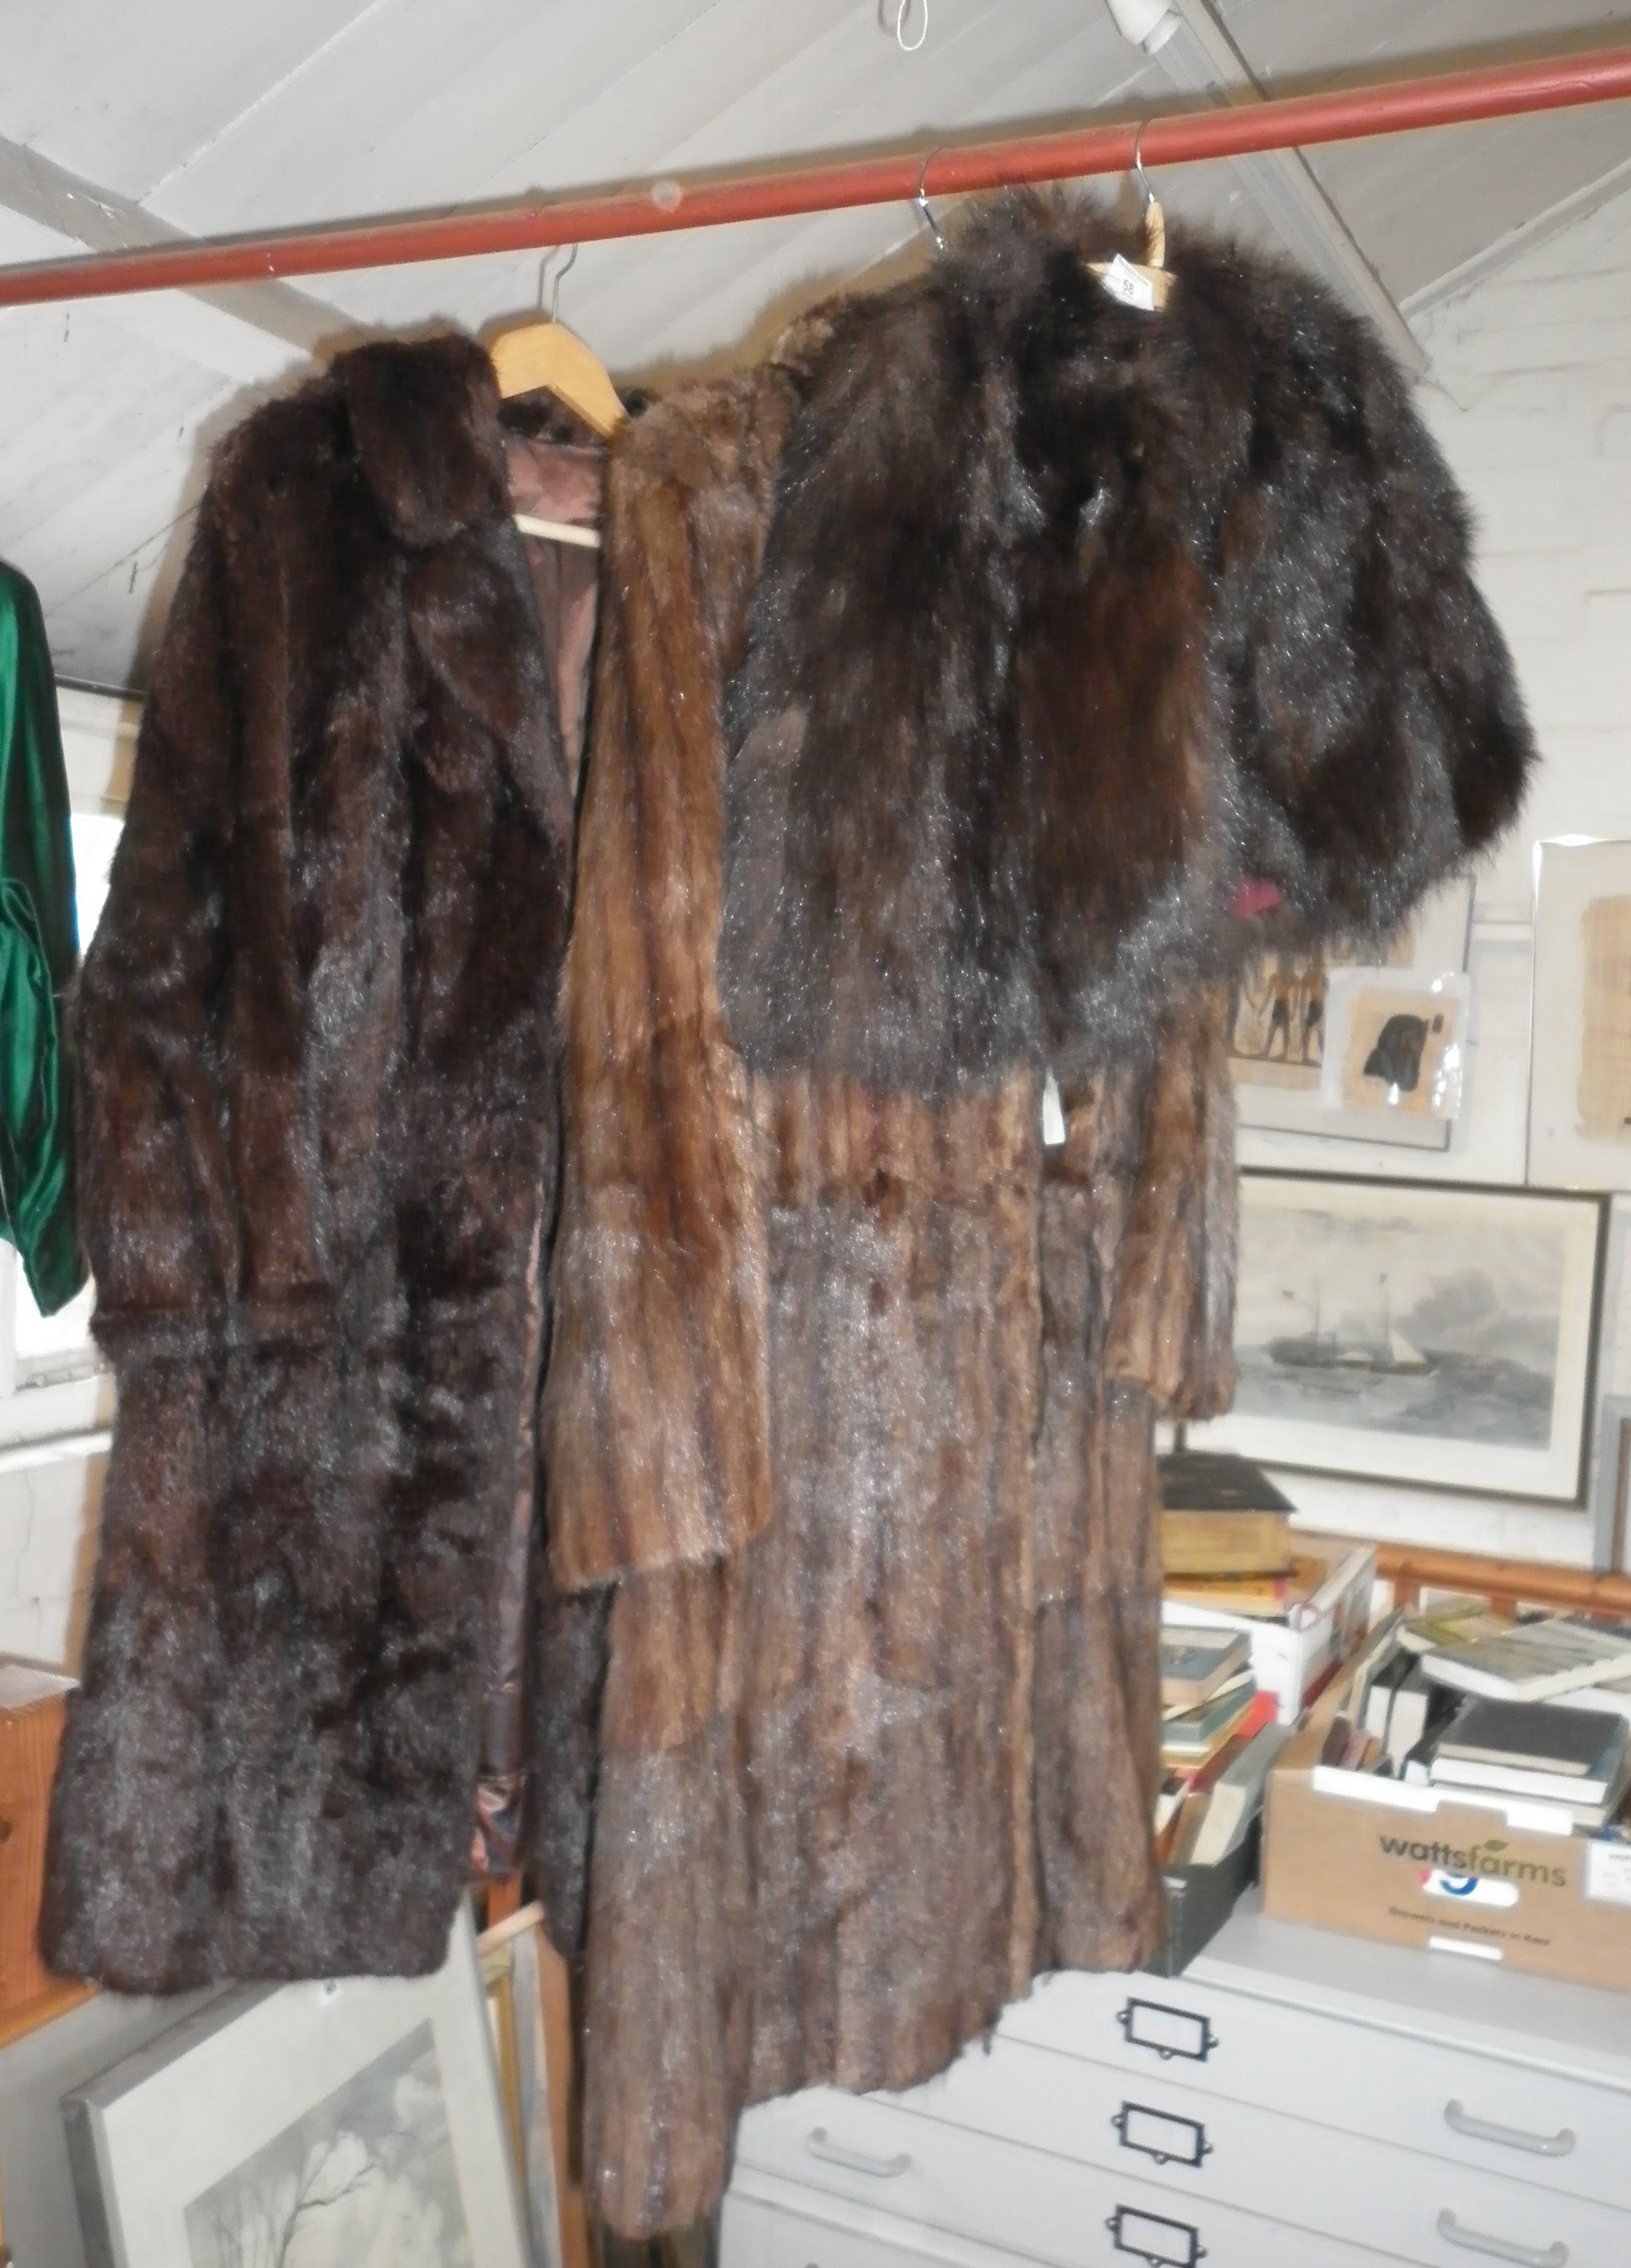 Vintage clothing: Two fur coats and a fur cape by W. Allen of Dundee